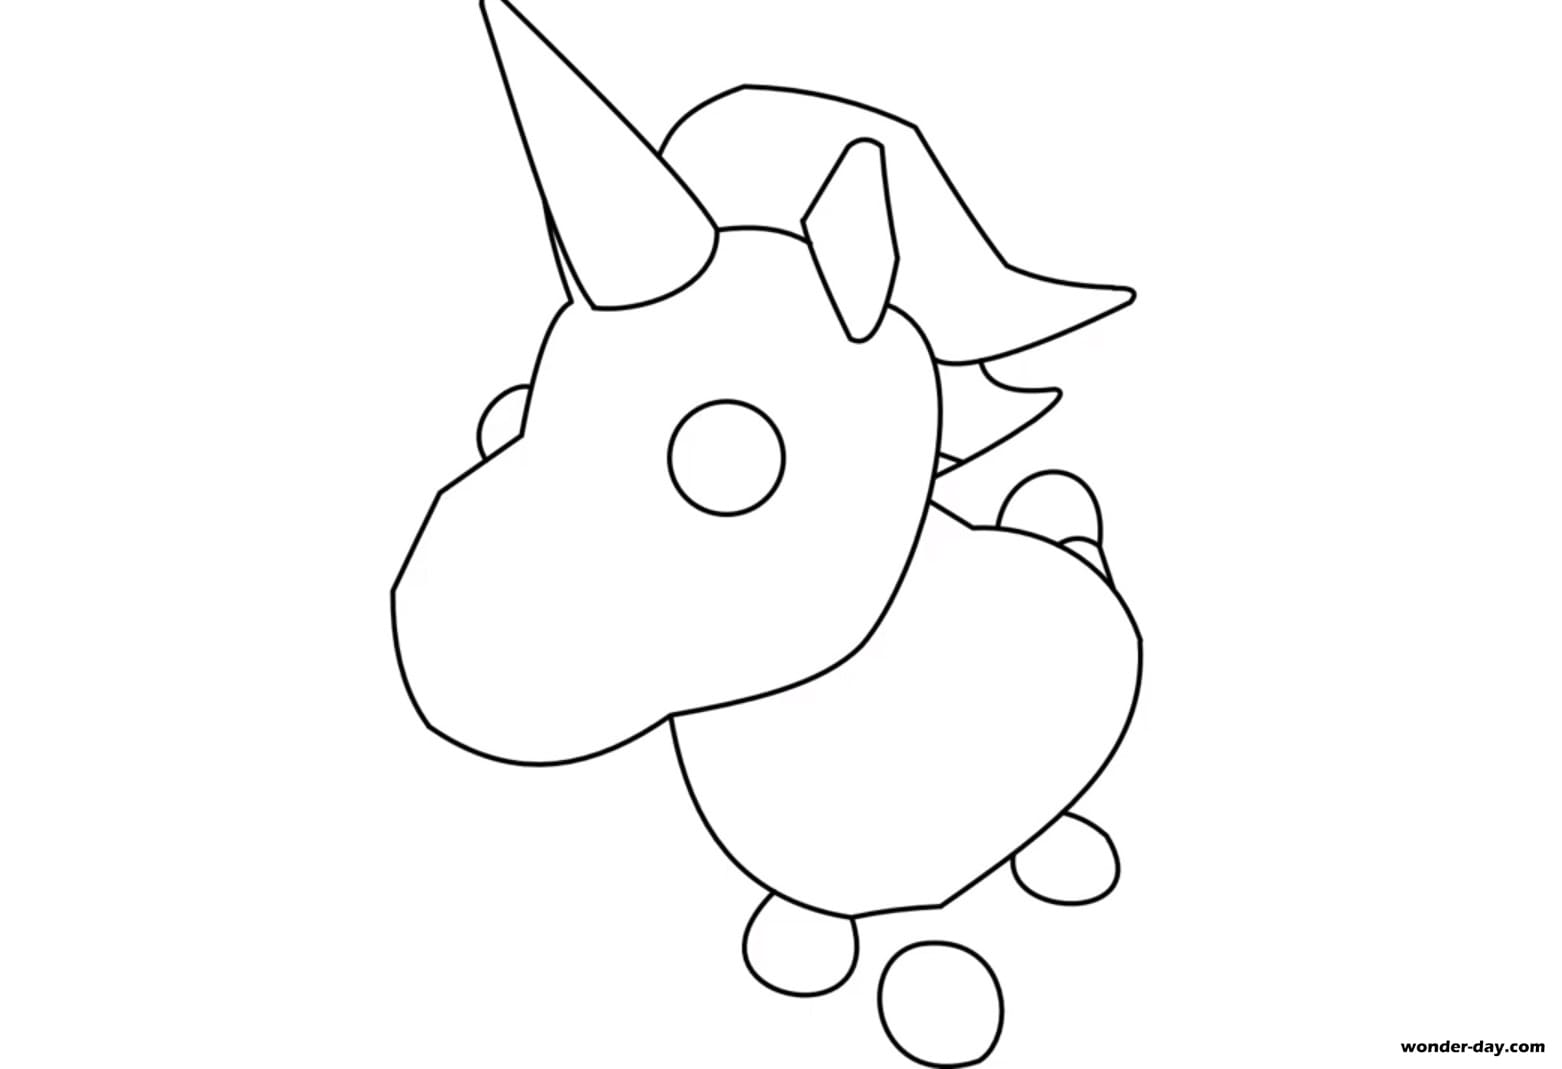 Coloring Pages Adopt Me Print For Free Wonder Day Com - unicorn roblox adopt me pets drawing